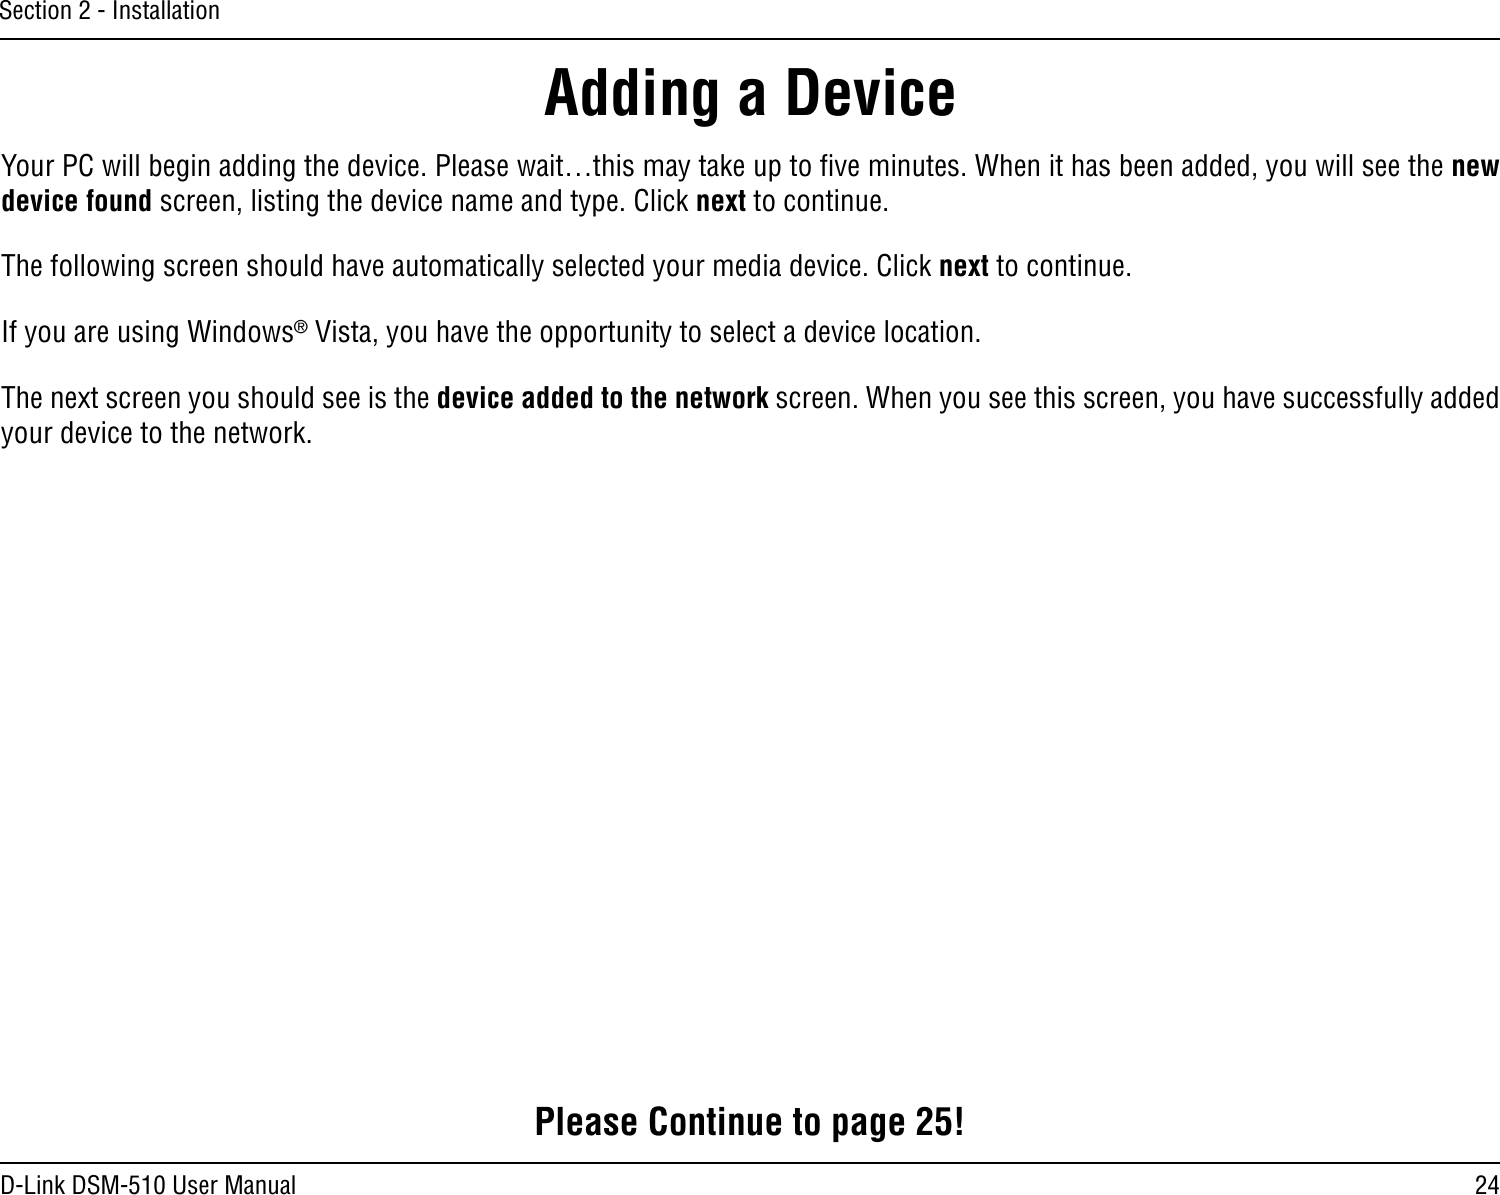 24D-Link DSM-510 User ManualSection 2 - InstallationYour PC will begin adding the device. Please wait…this may take up to ﬁve minutes. When it has been added, you will see the new device found screen, listing the device name and type. Click next to continue.The following screen should have automatically selected your media device. Click next to continue.If you are using Windows® Vista, you have the opportunity to select a device location.The next screen you should see is the device added to the network screen. When you see this screen, you have successfully added your device to the network.Adding a DevicePlease Continue to page 25!